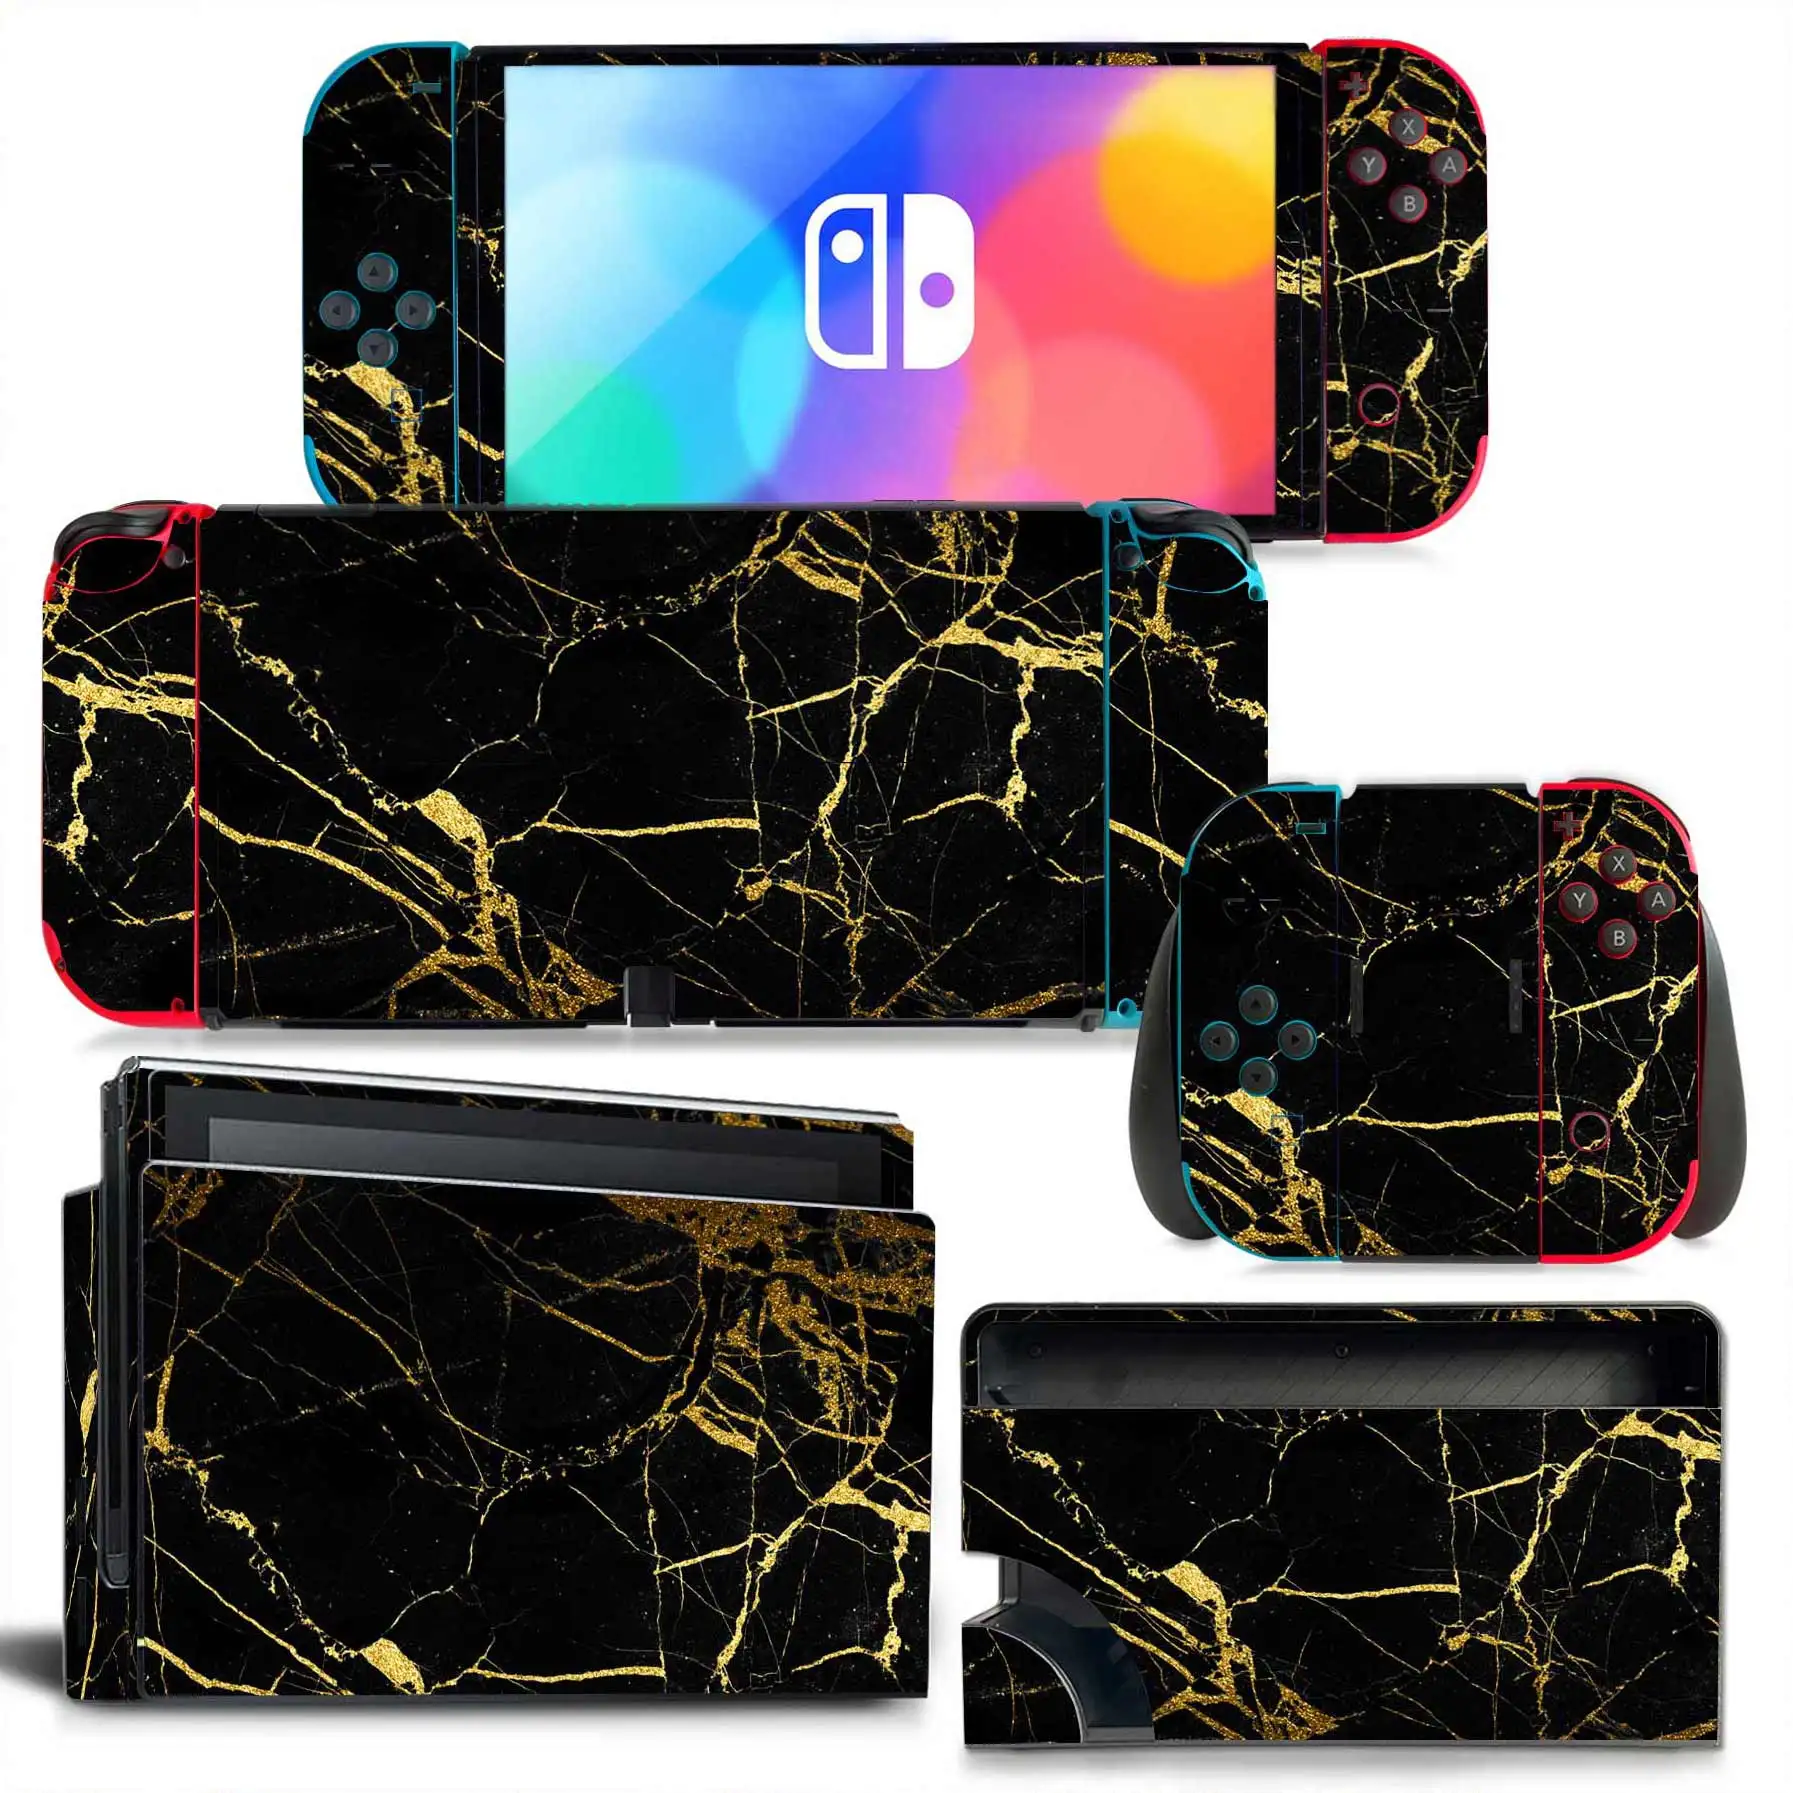 0788 Switch Oled Skin Sticker Decal Cover for Switch Oled Console skin Dock Joy Con Wrap Full Wrap Skin NS OLED Vinyl